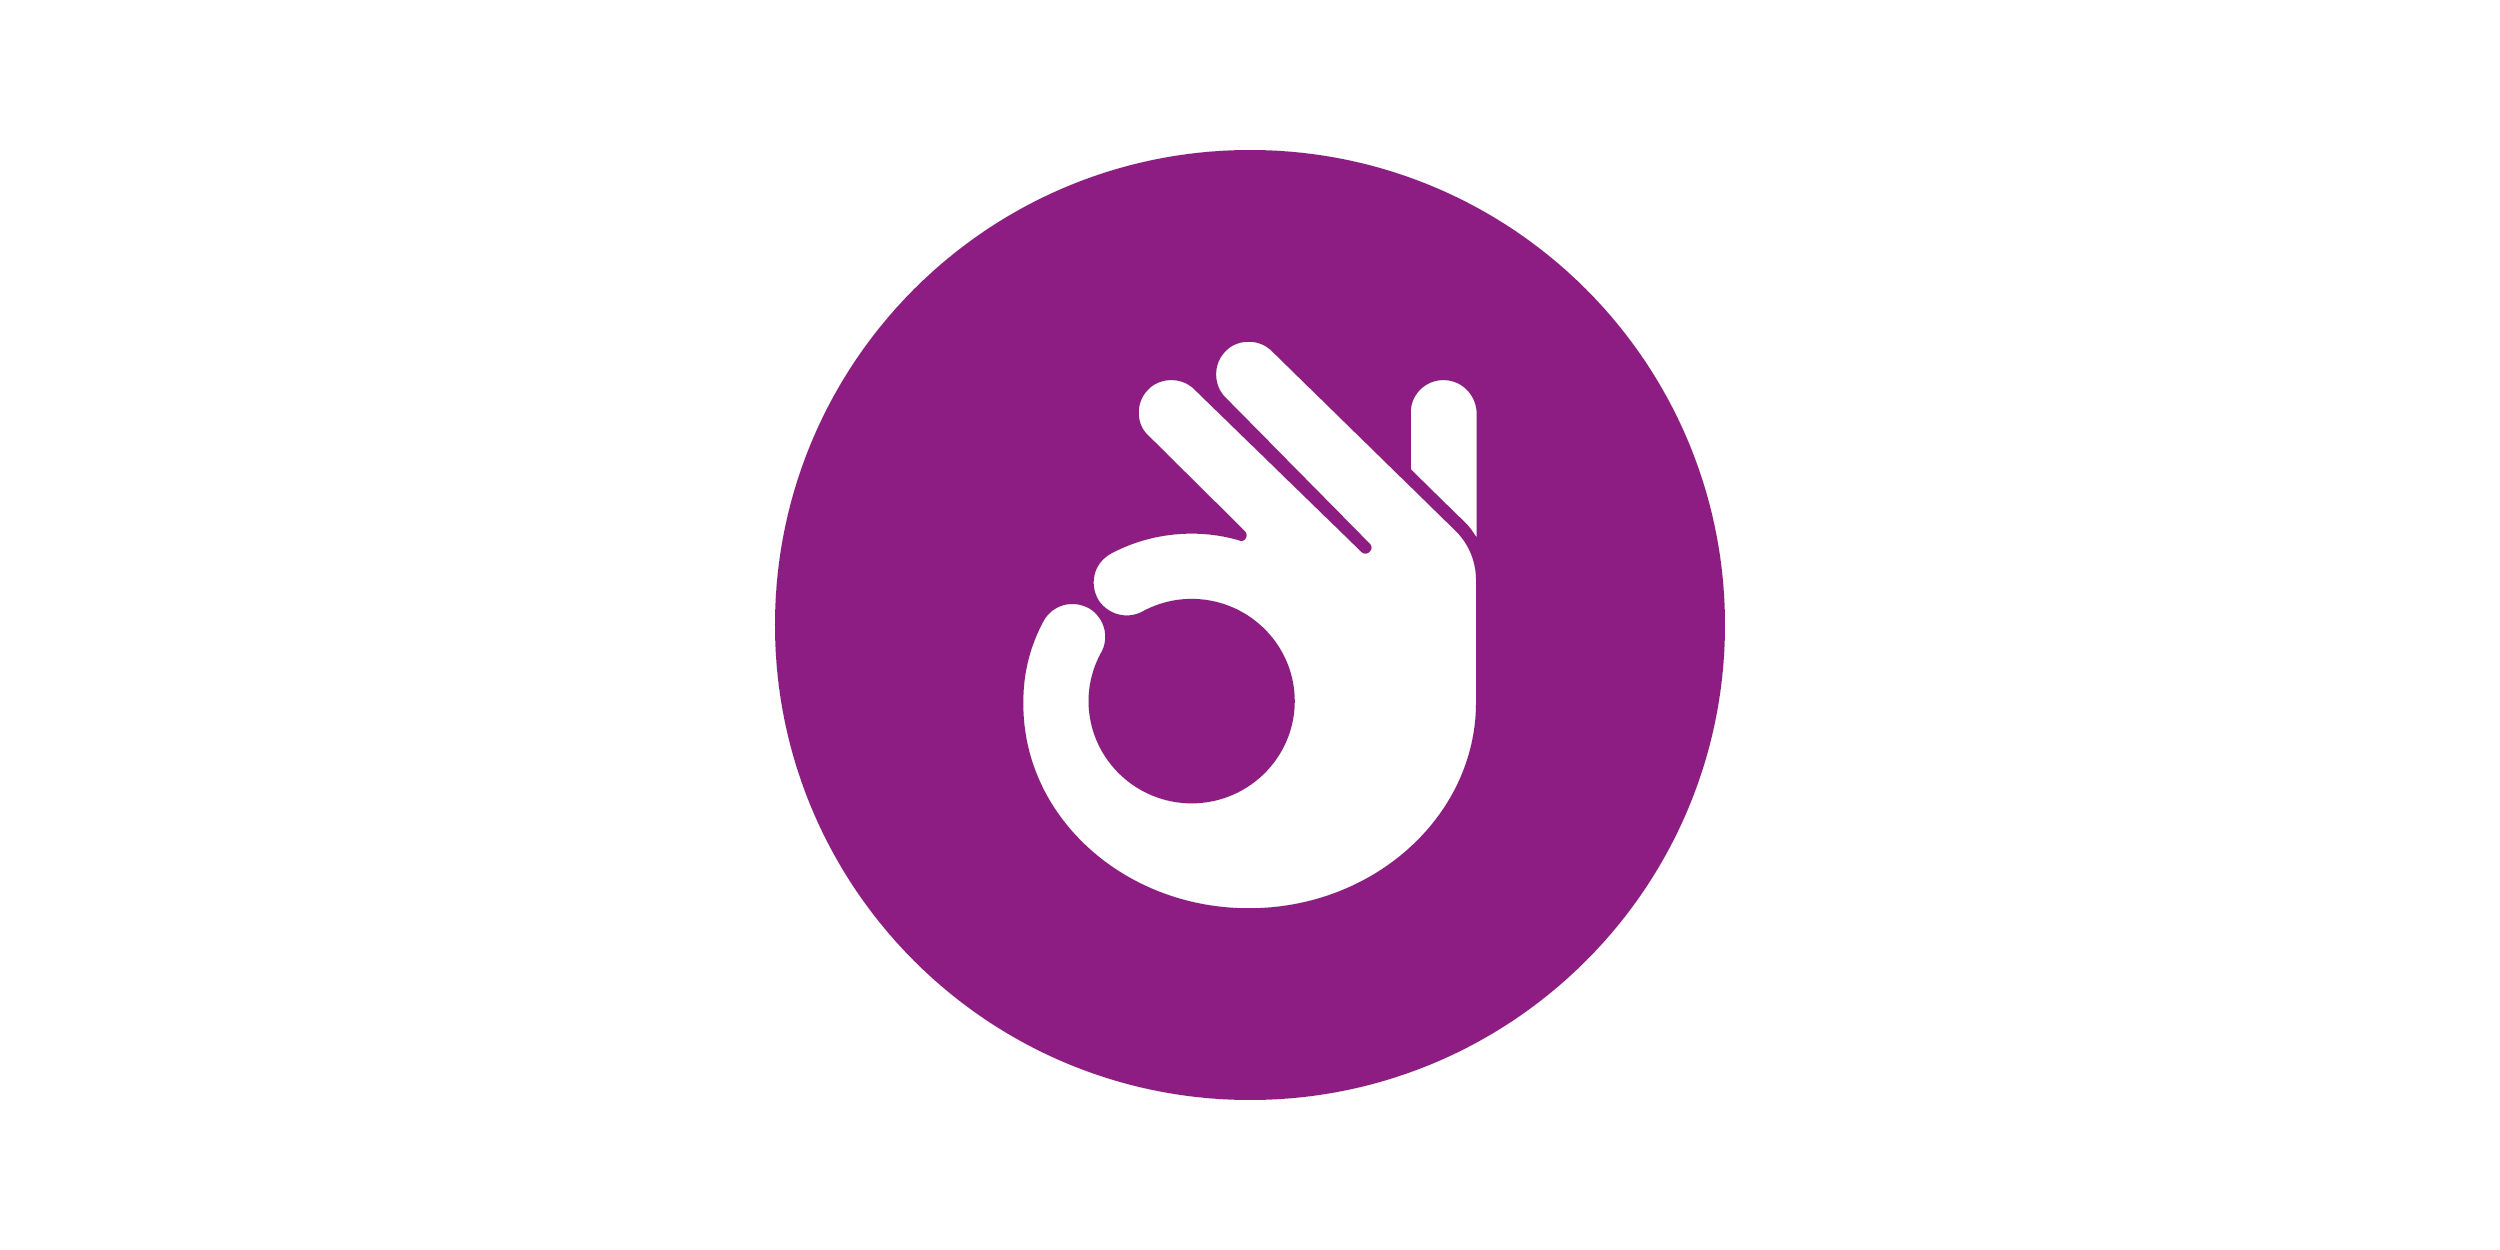 Icon of a white hand making the OK sign on a purple background